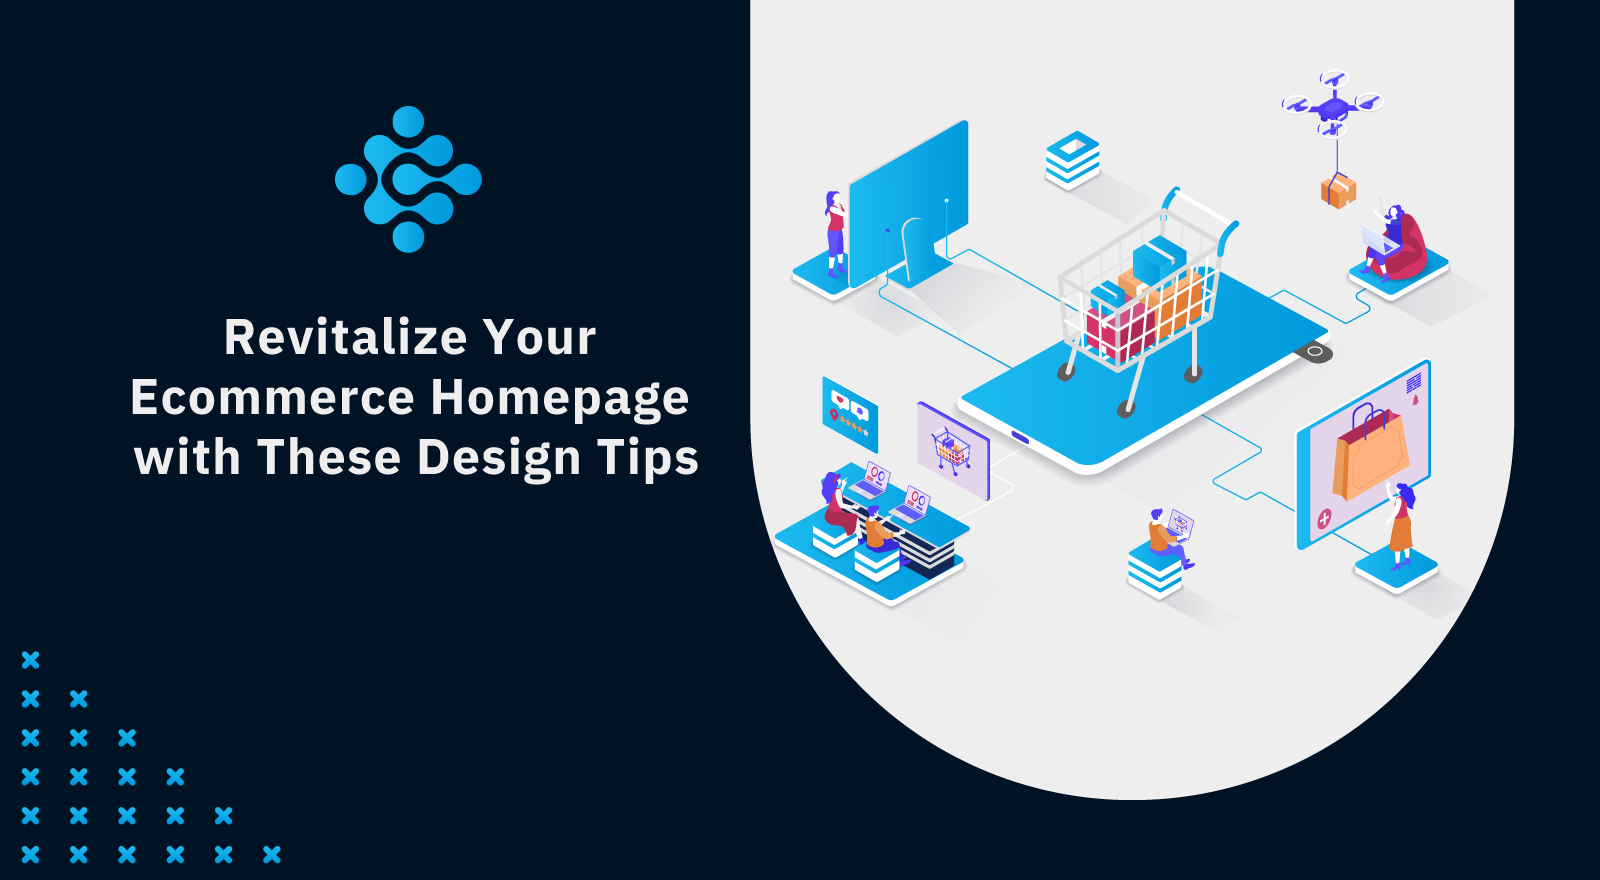 Revitalize Your Ecommerce Homepage with These Design Tips